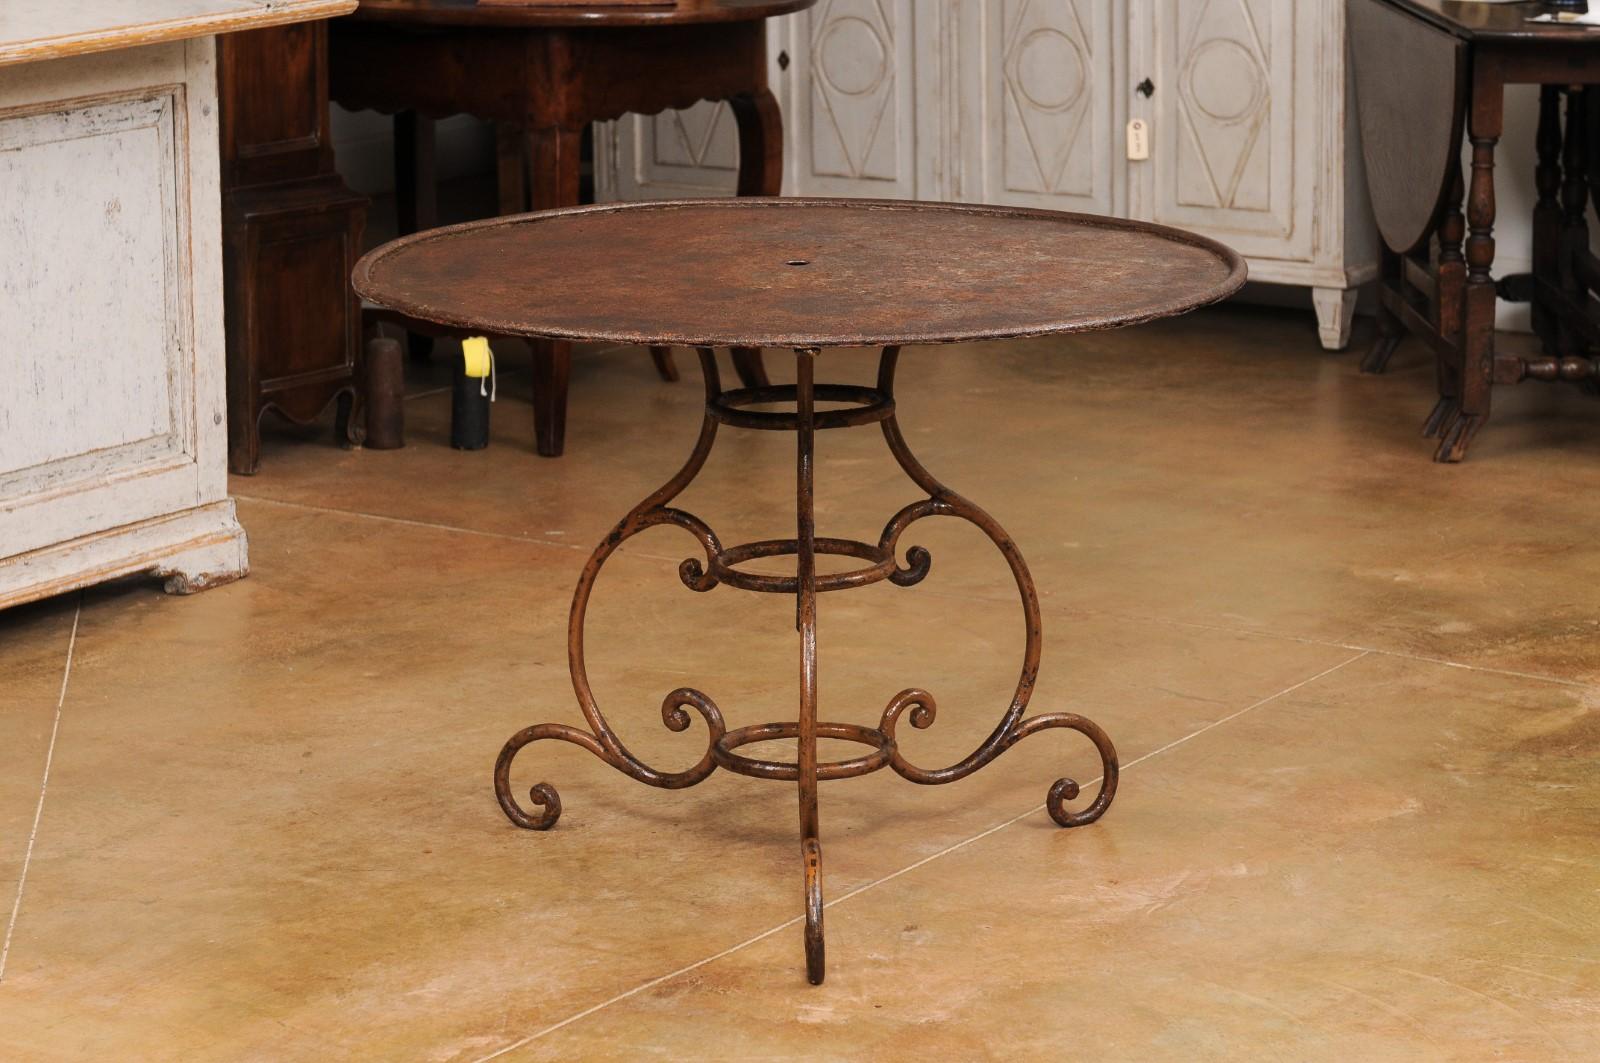 French 19th Century Round Iron Garden Table with Scrolling Base and Rusty Finish For Sale 4